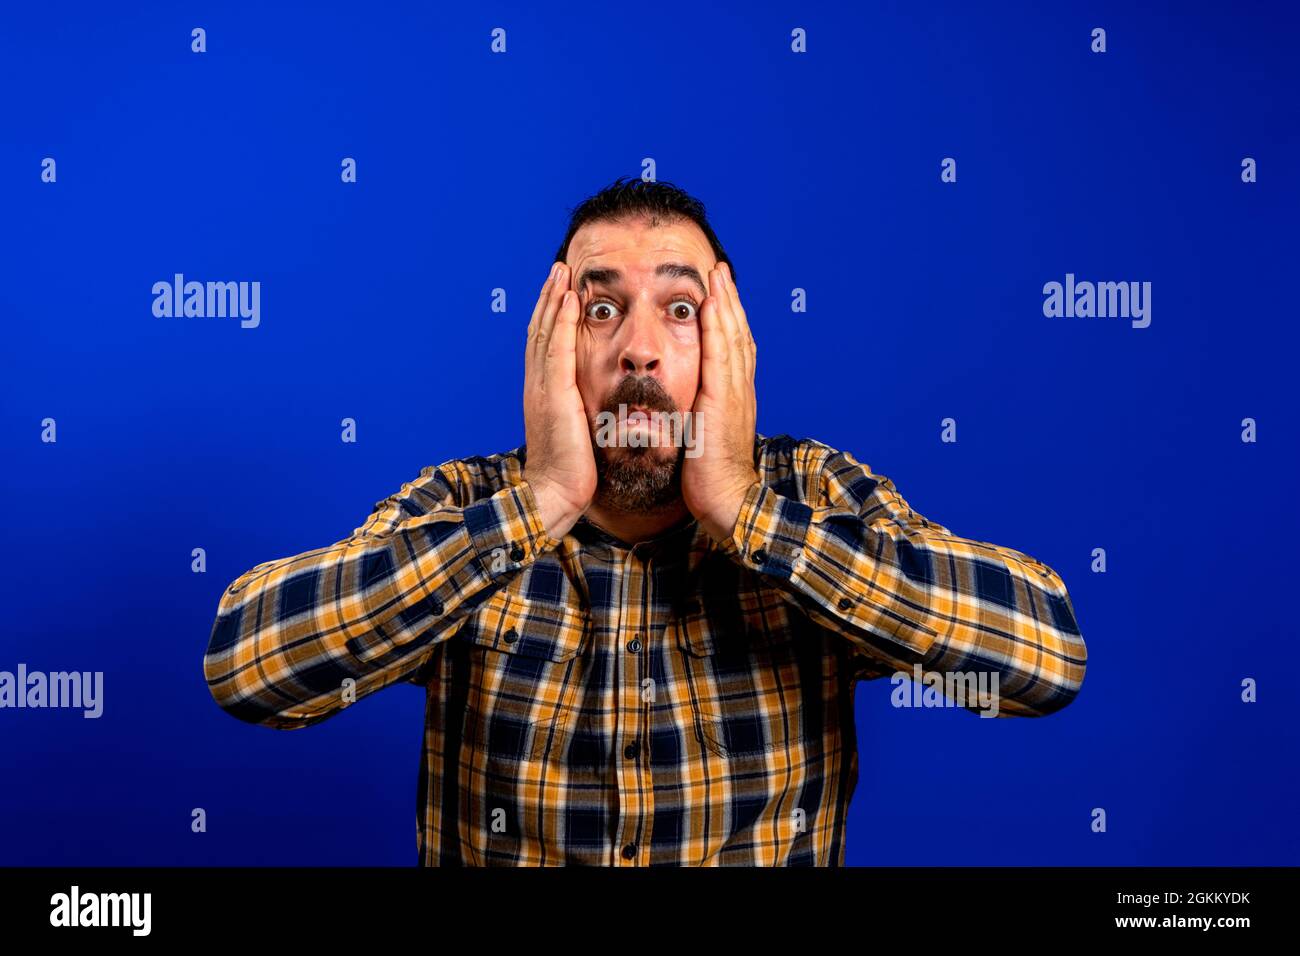 Young man with a frightened pose over blue monochrome background Stock Photo